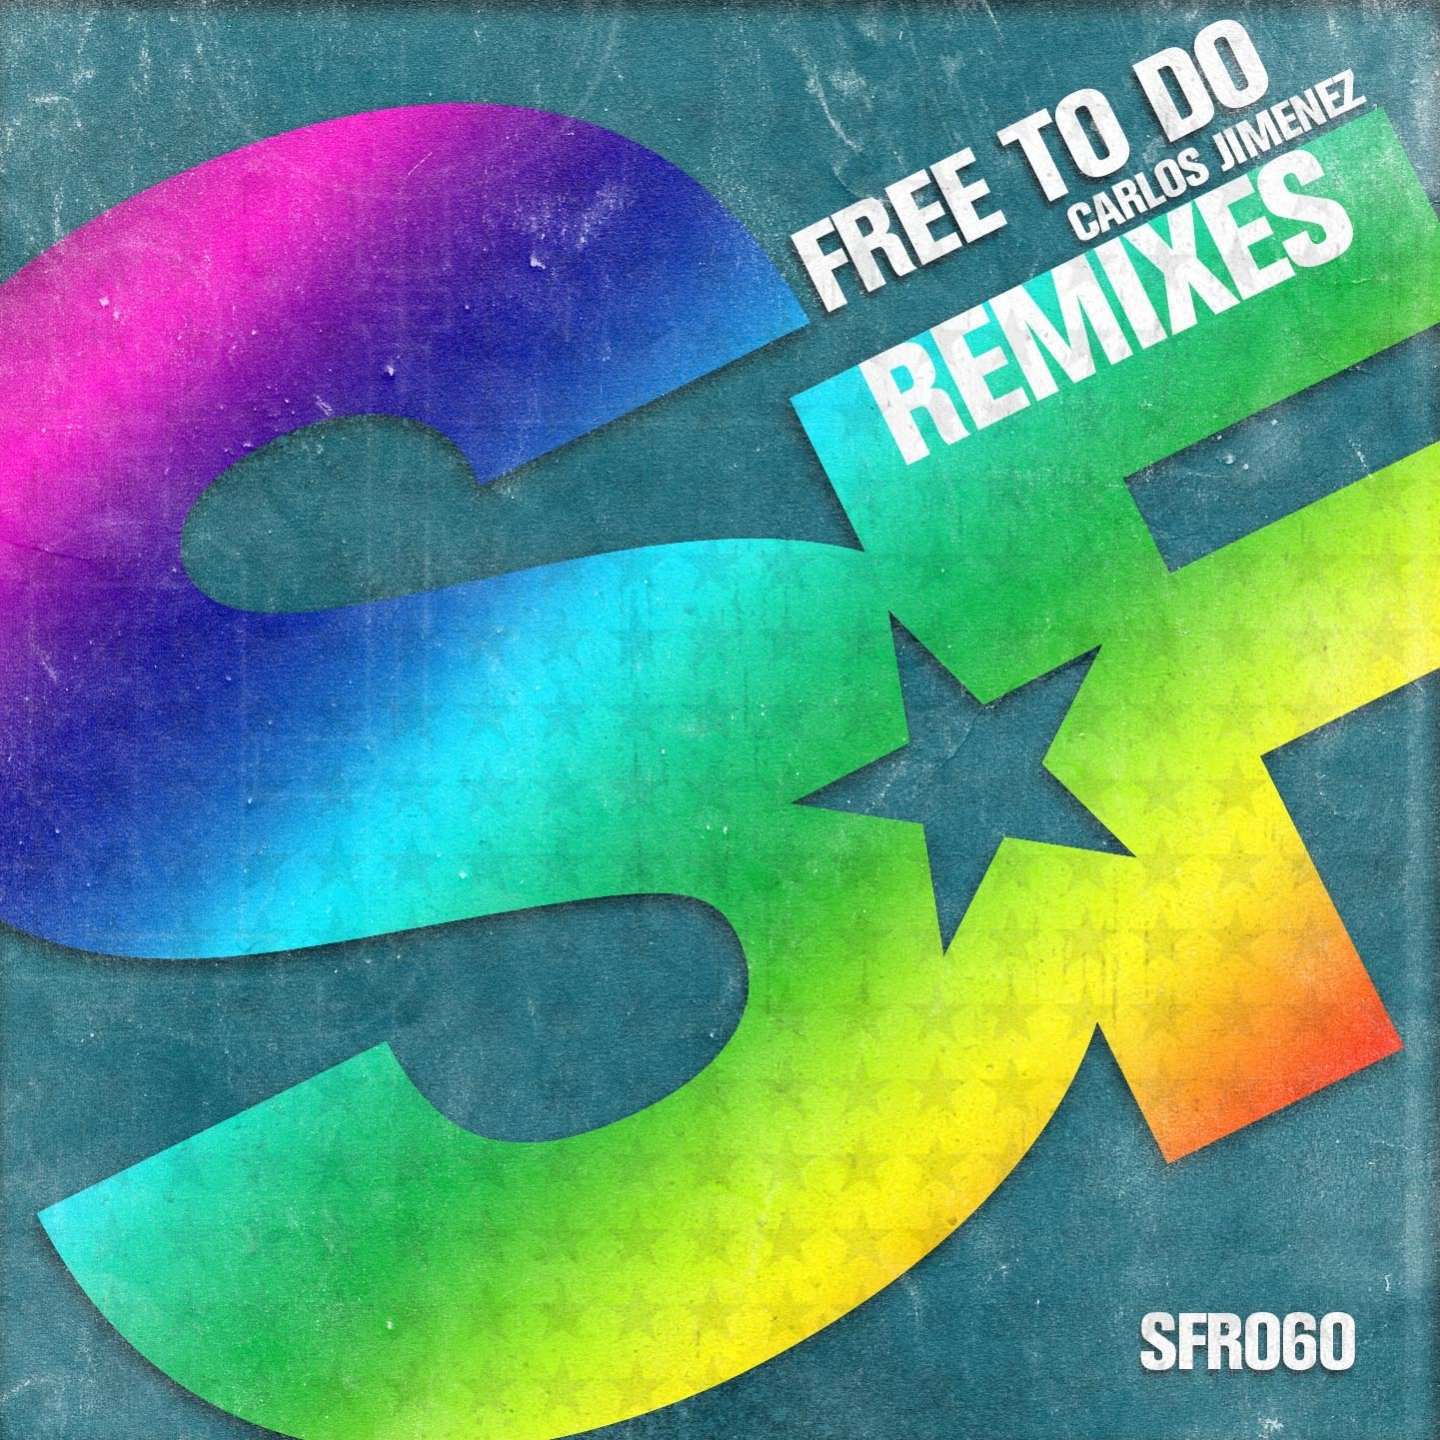 Free to Do (Javi Torres Synth Remix)